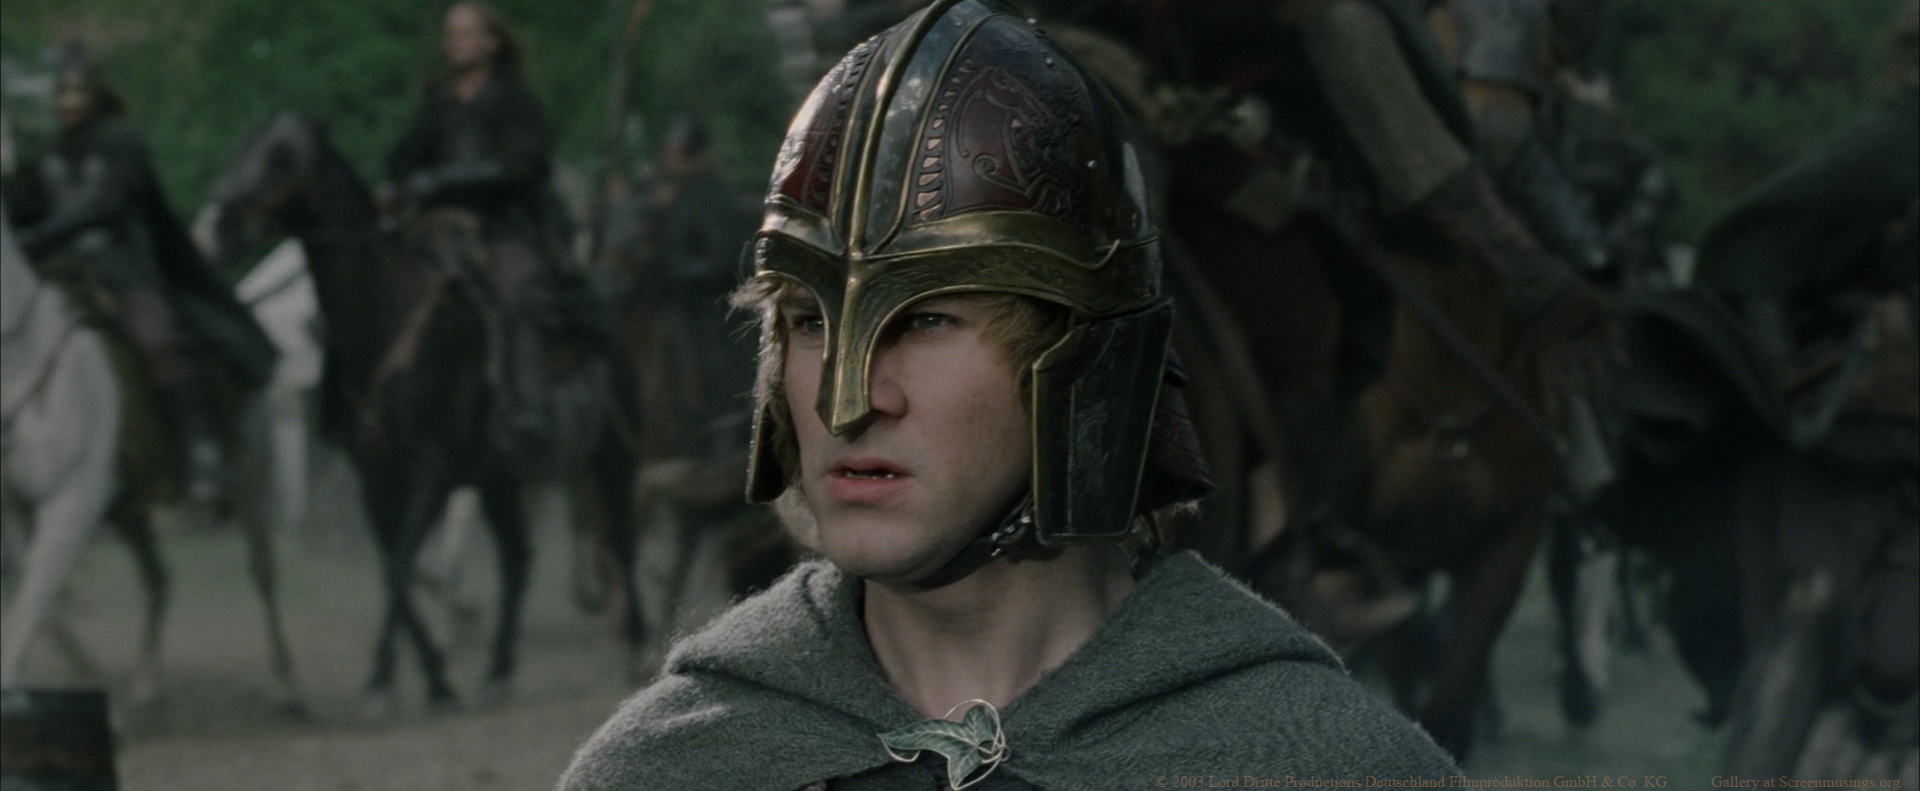 Dominic Monaghan in The Lord of the Rings: The Return of the King